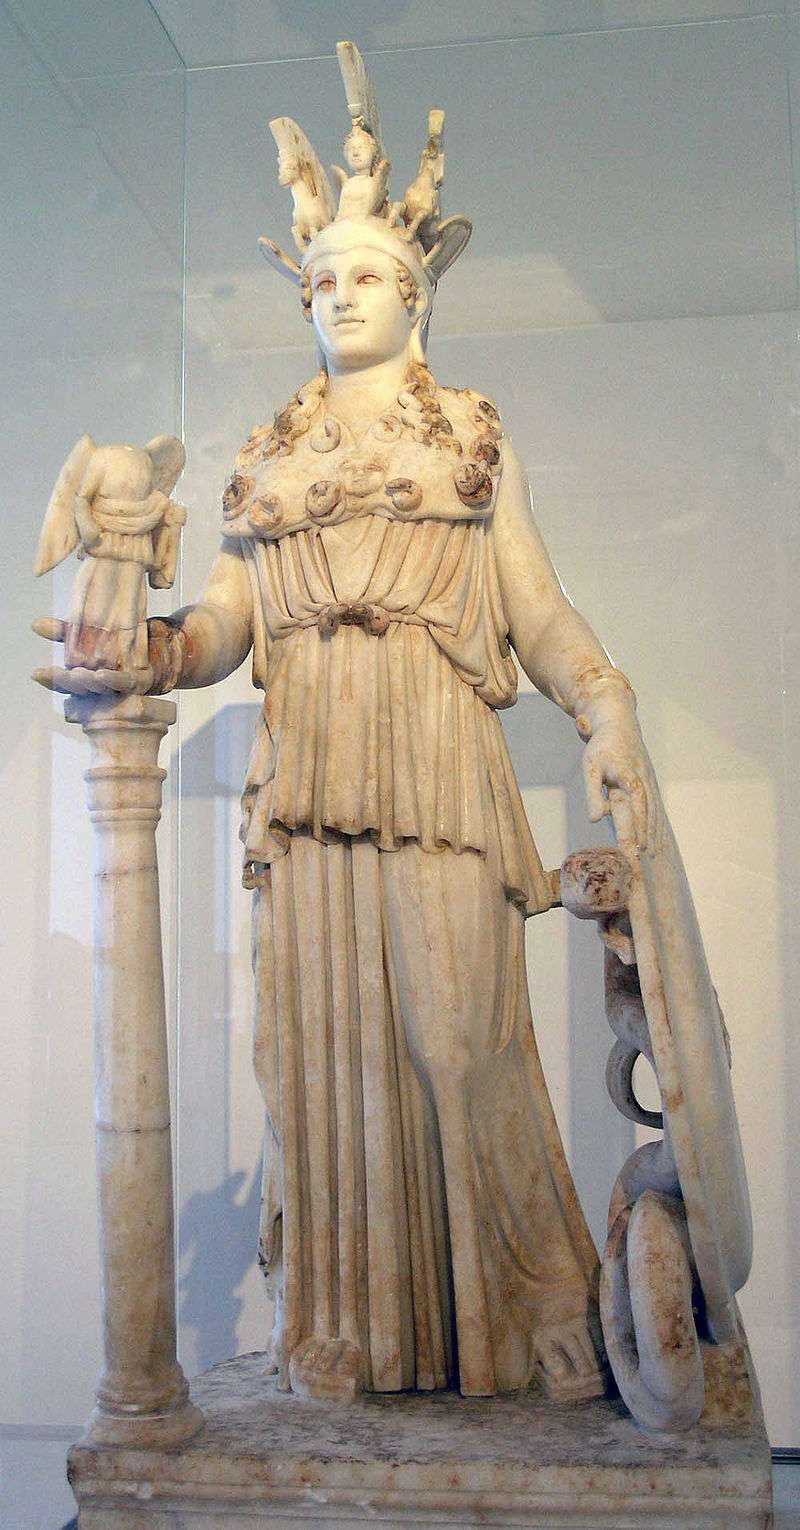 A Roman period, 2nd century AD sculpture found near the Varvakeion school reflects the type of the restored Athena Parthenos presently in the National Archaeological Museum, Athens